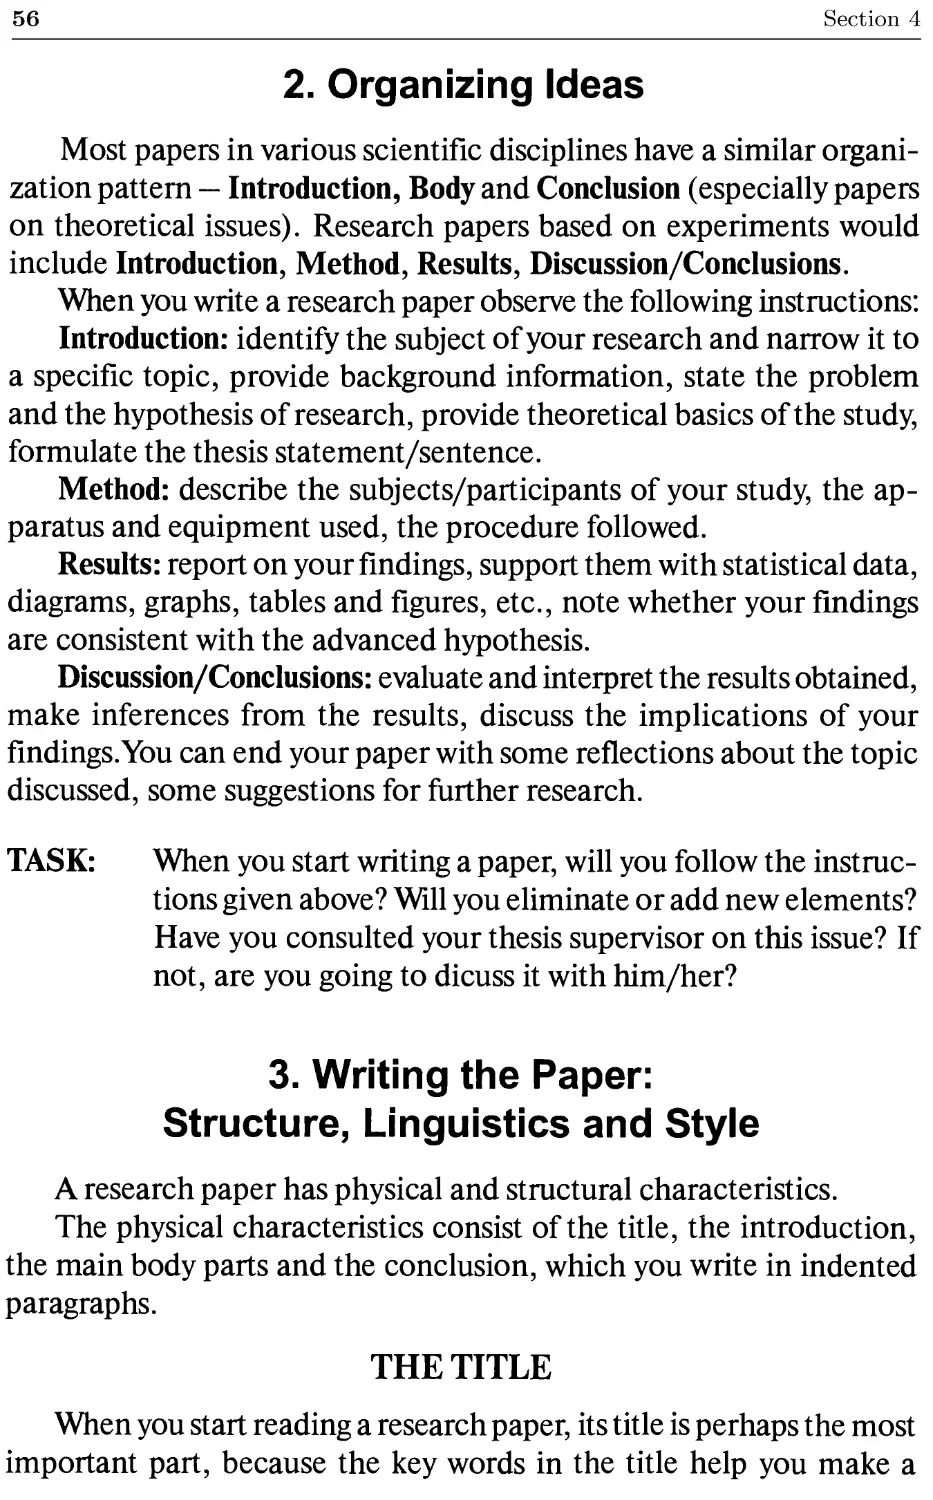 2. Organizing Ideas
3. Writing a Paper: Structure, Linguistics and Style